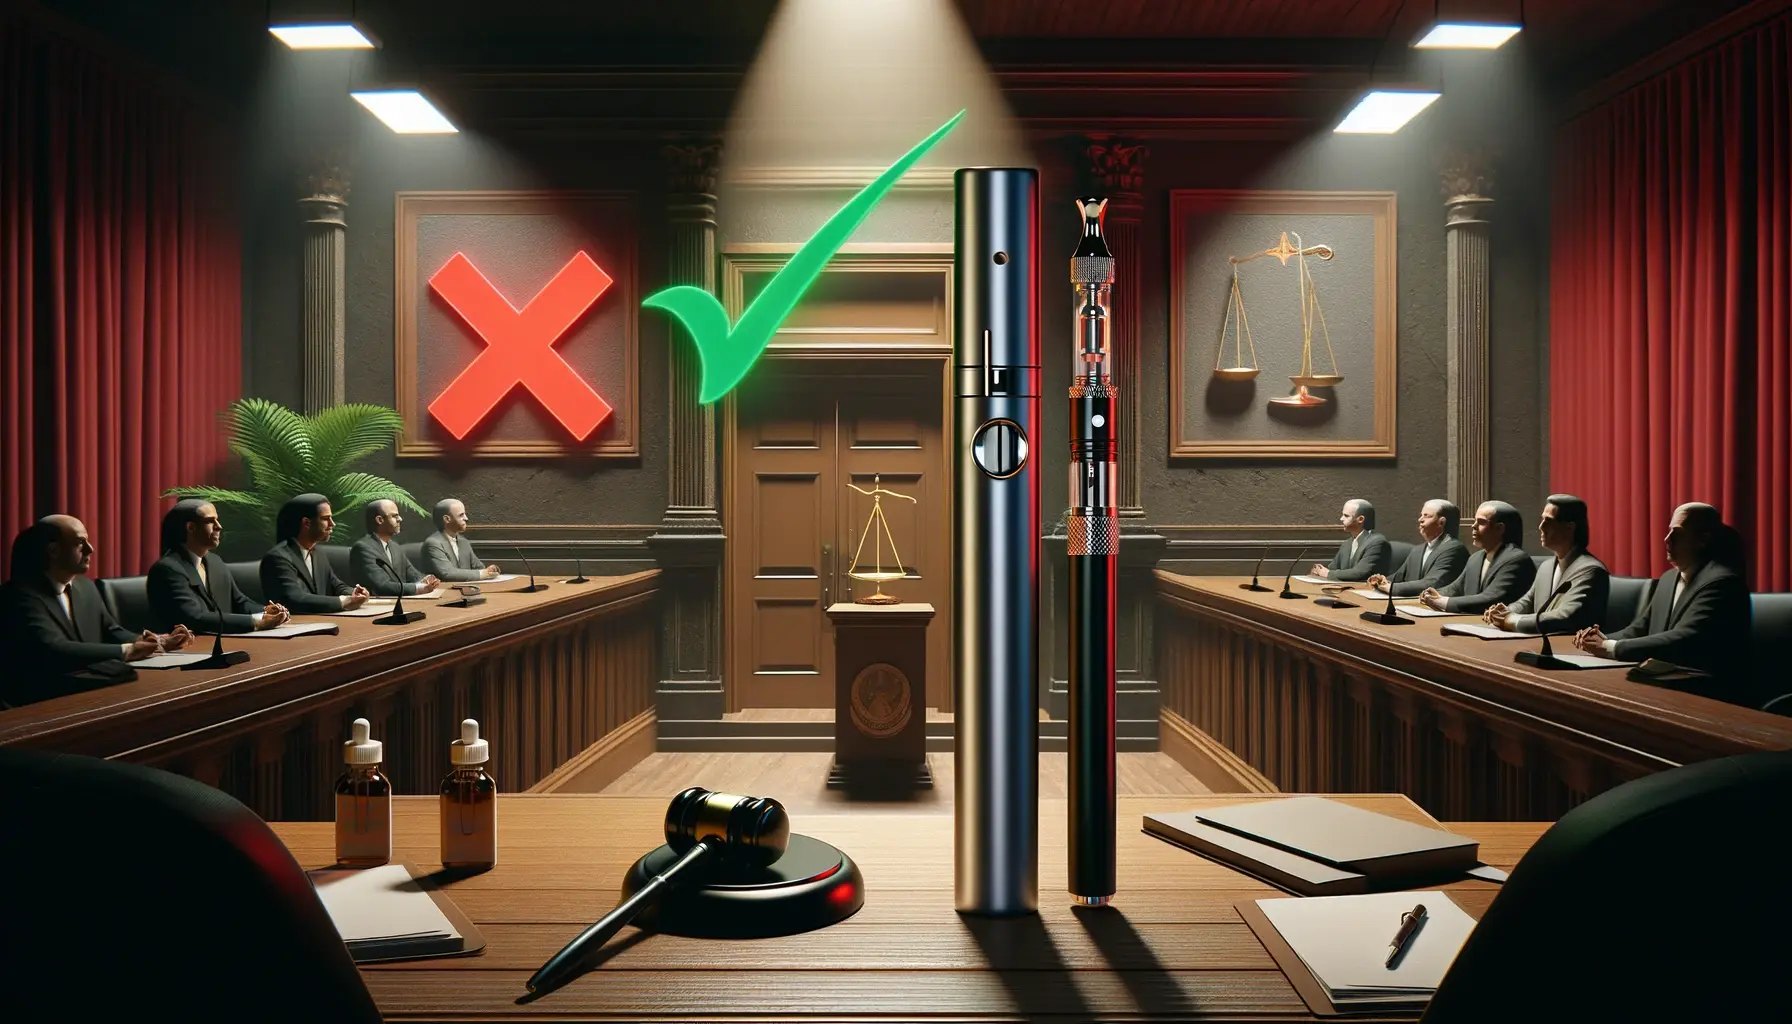 A concept image representing the legal status of Delta 8 pens. The scene is split in two: one half shows a bright, orderly courtroom with a judge's gavel and a green checkmark, symbolizing legality. The other half is darker, depicting a closed courtroom door with a red 'X' mark, indicating prohibition. Between these two halves, a Delta 8 vape pen is prominently featured, creating a visual metaphor for the debate surrounding its legal status. The image should be balanced, visually appealing, and suitable for a 16:9 aspect ratio.